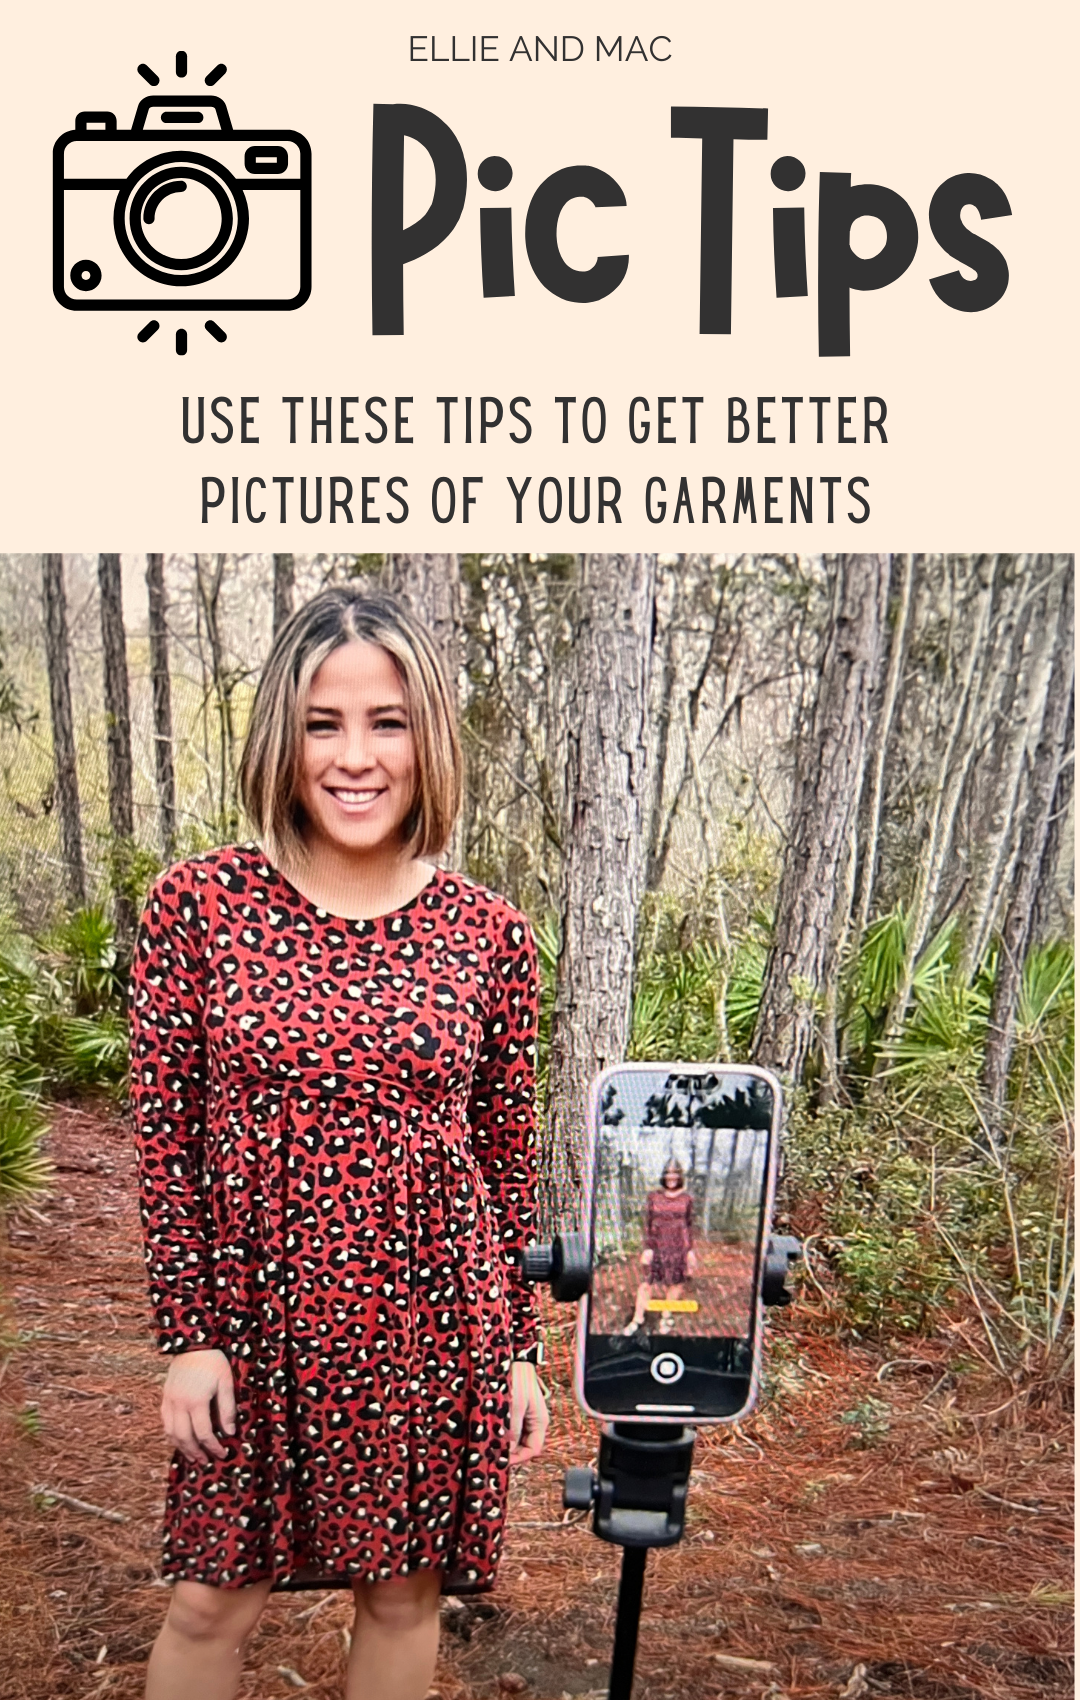 How to Take Good Pictures of Your Garments